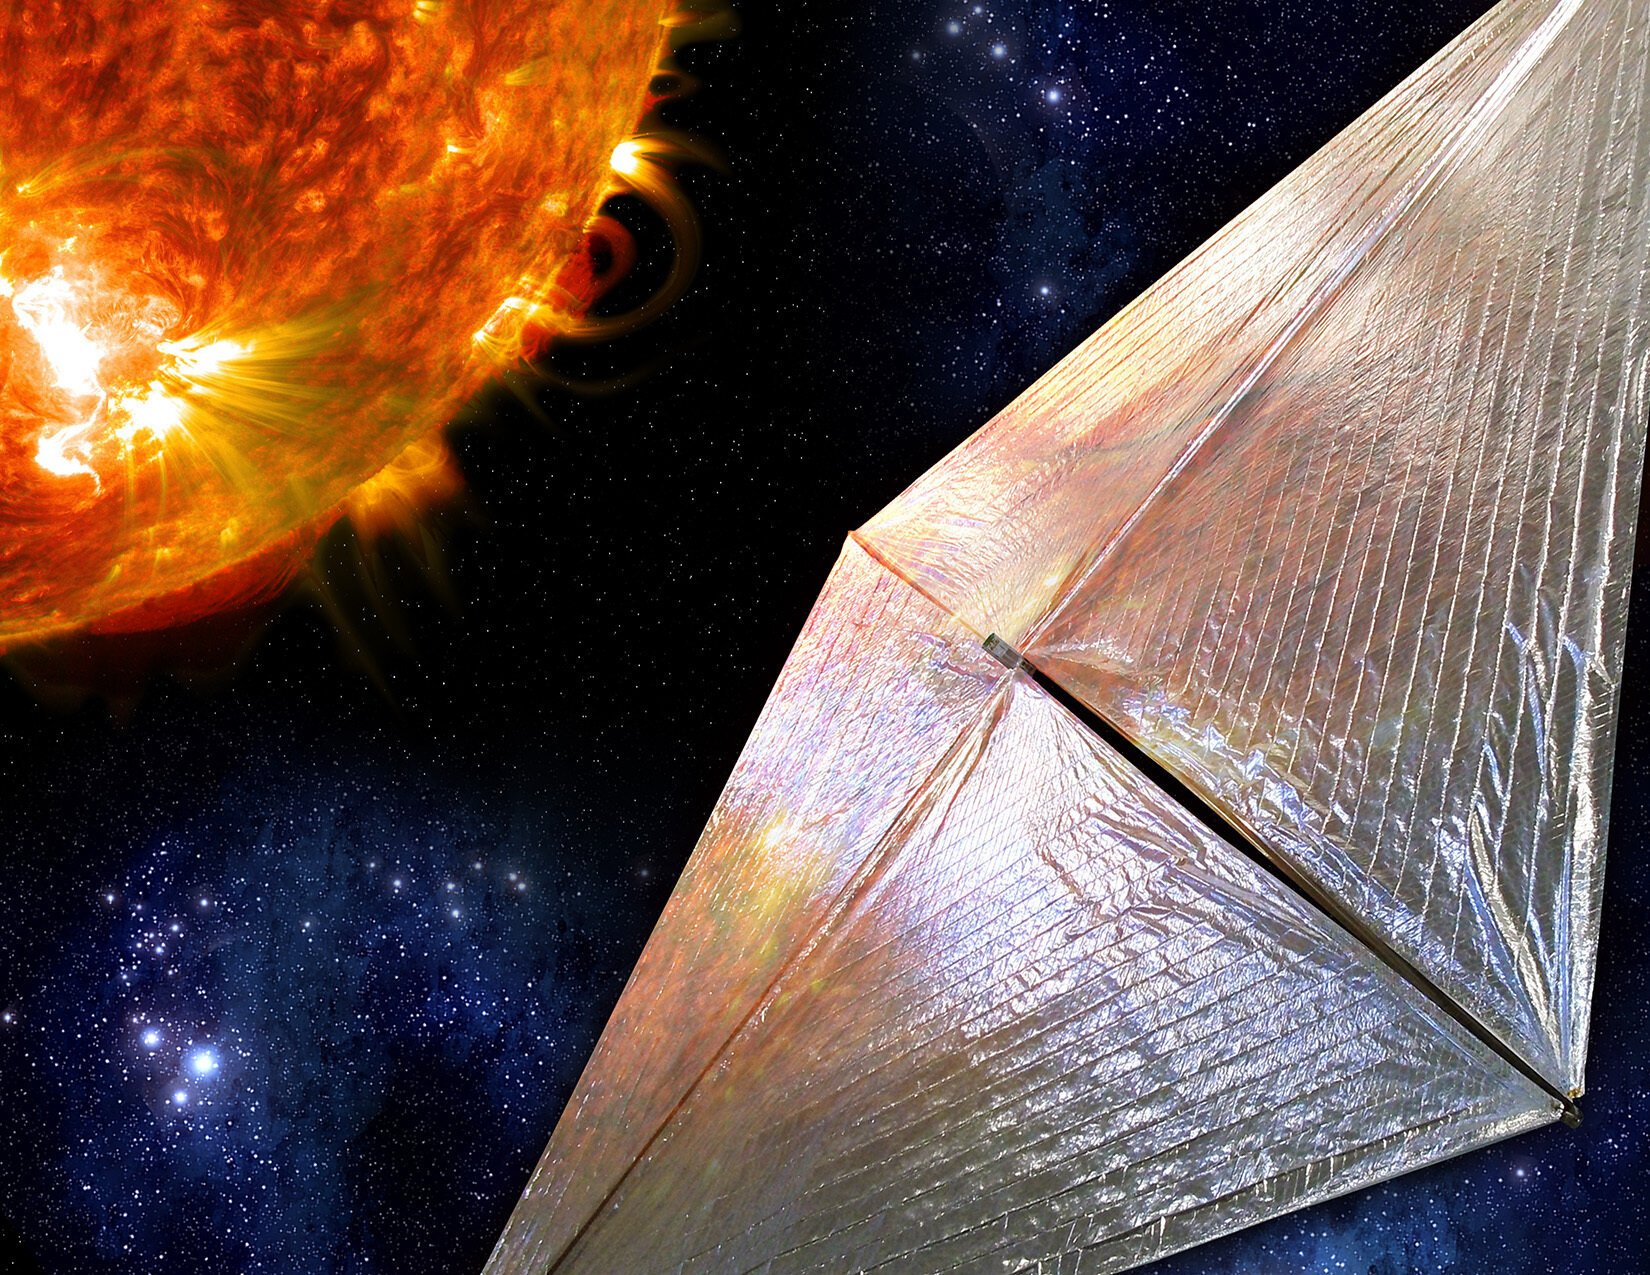 At 18,000 Square Feet NASA Approves Solar Cruiser the Largest Solar Sail to Study the Sun